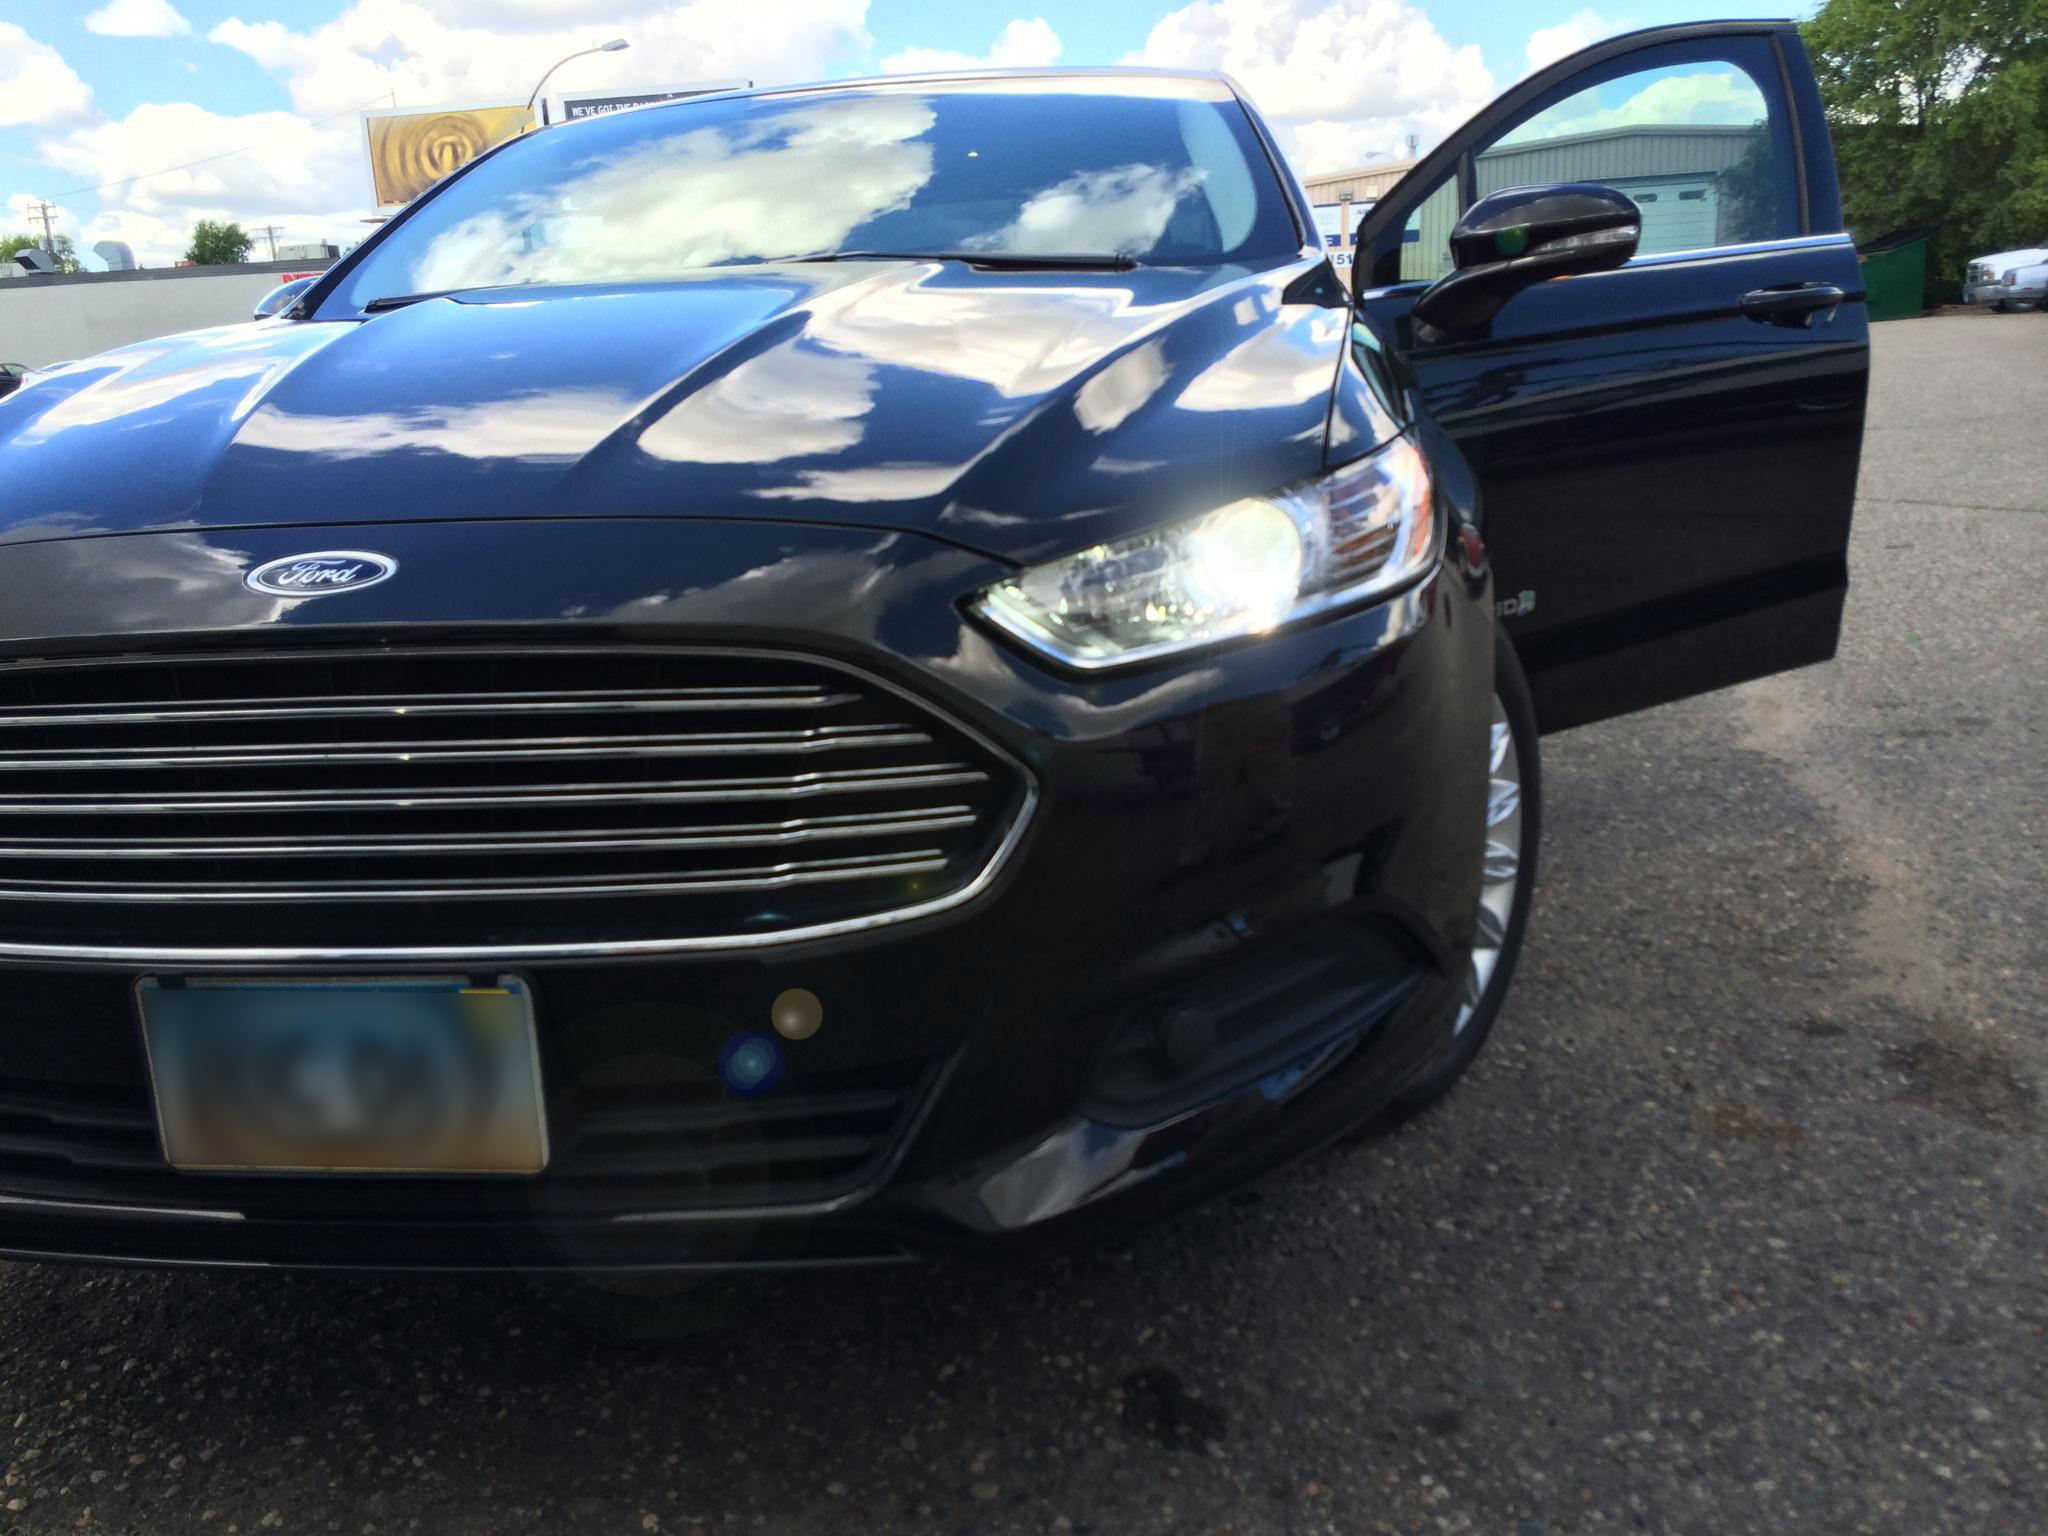 Hid Headlight Solution For 2014 Ford Fusion